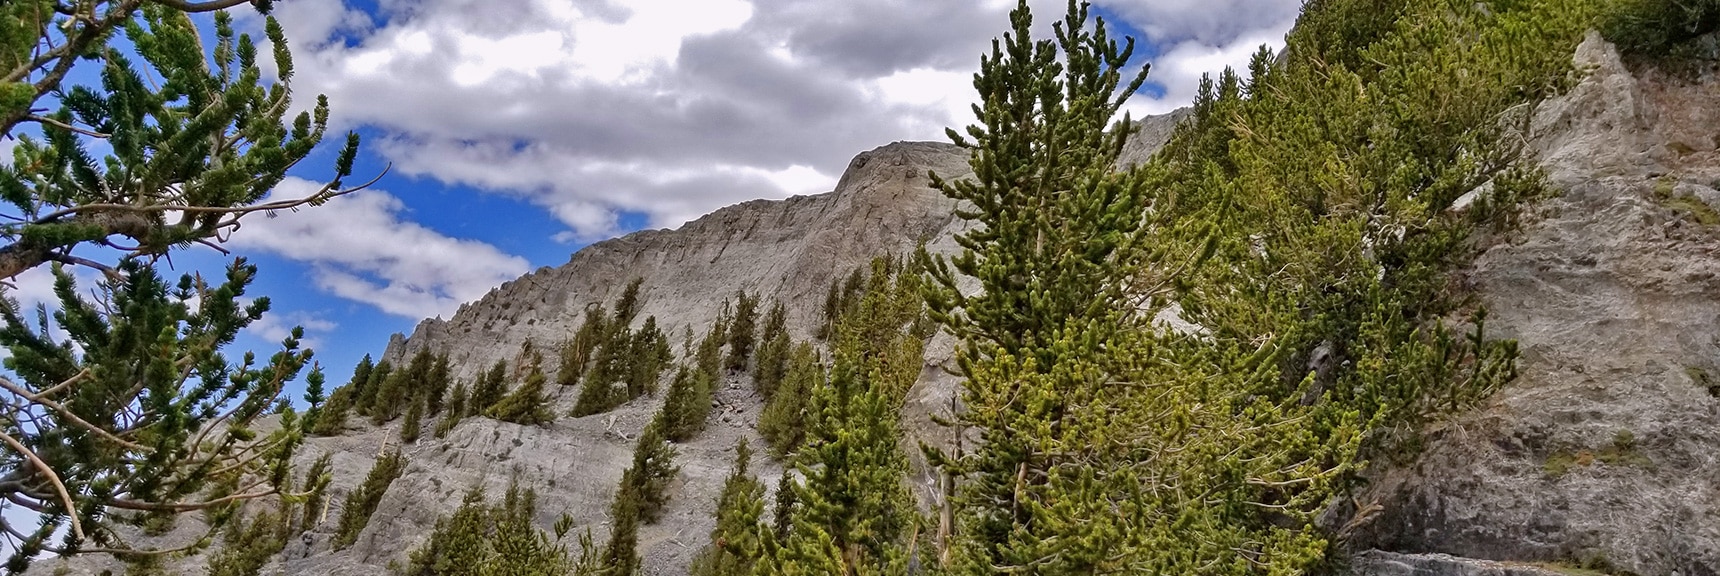 Total Solitude in the Spot. Nobody Comes Here Even on the Busiest Days. | Mummy Mountain NW Cliffs | Mt Charleston Wilderness | Spring Mountains, Nevada